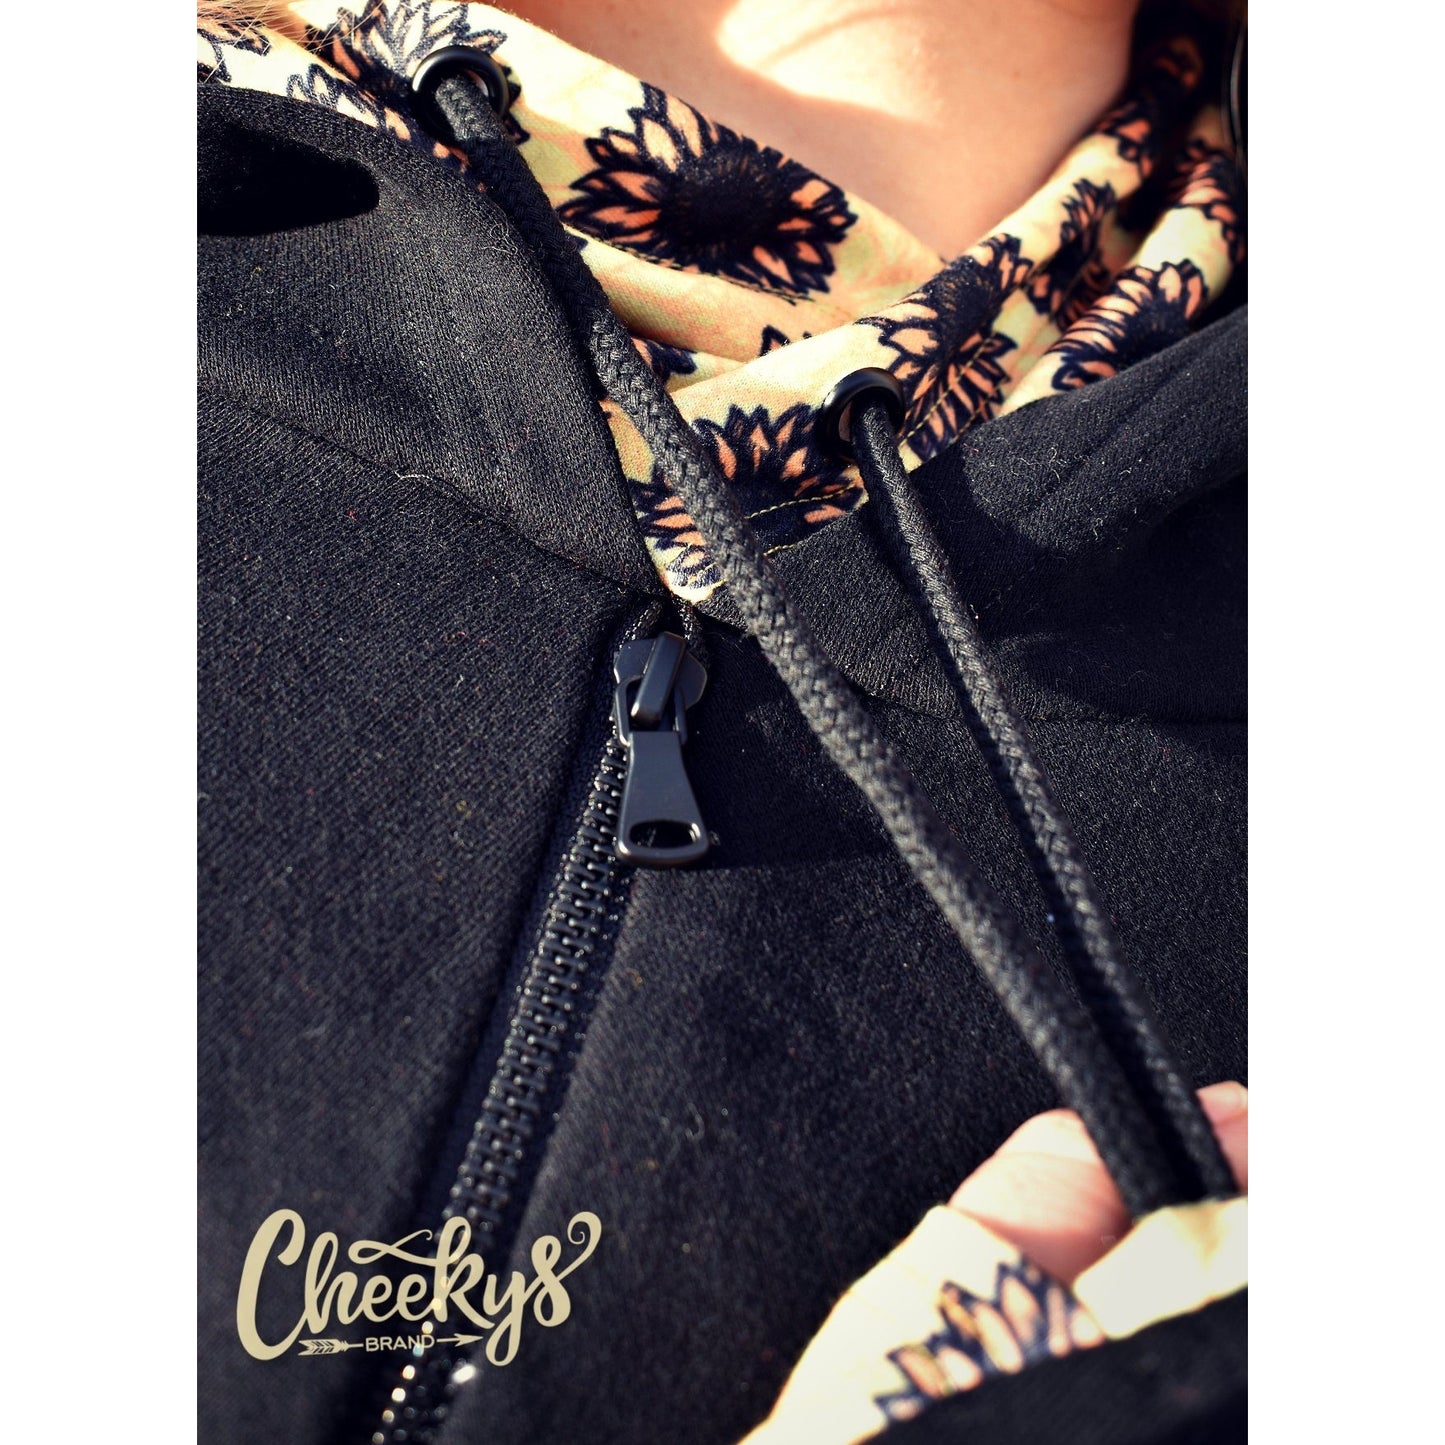 Solid Black With Sunflowers Two Hood Hoodie by Cheekys